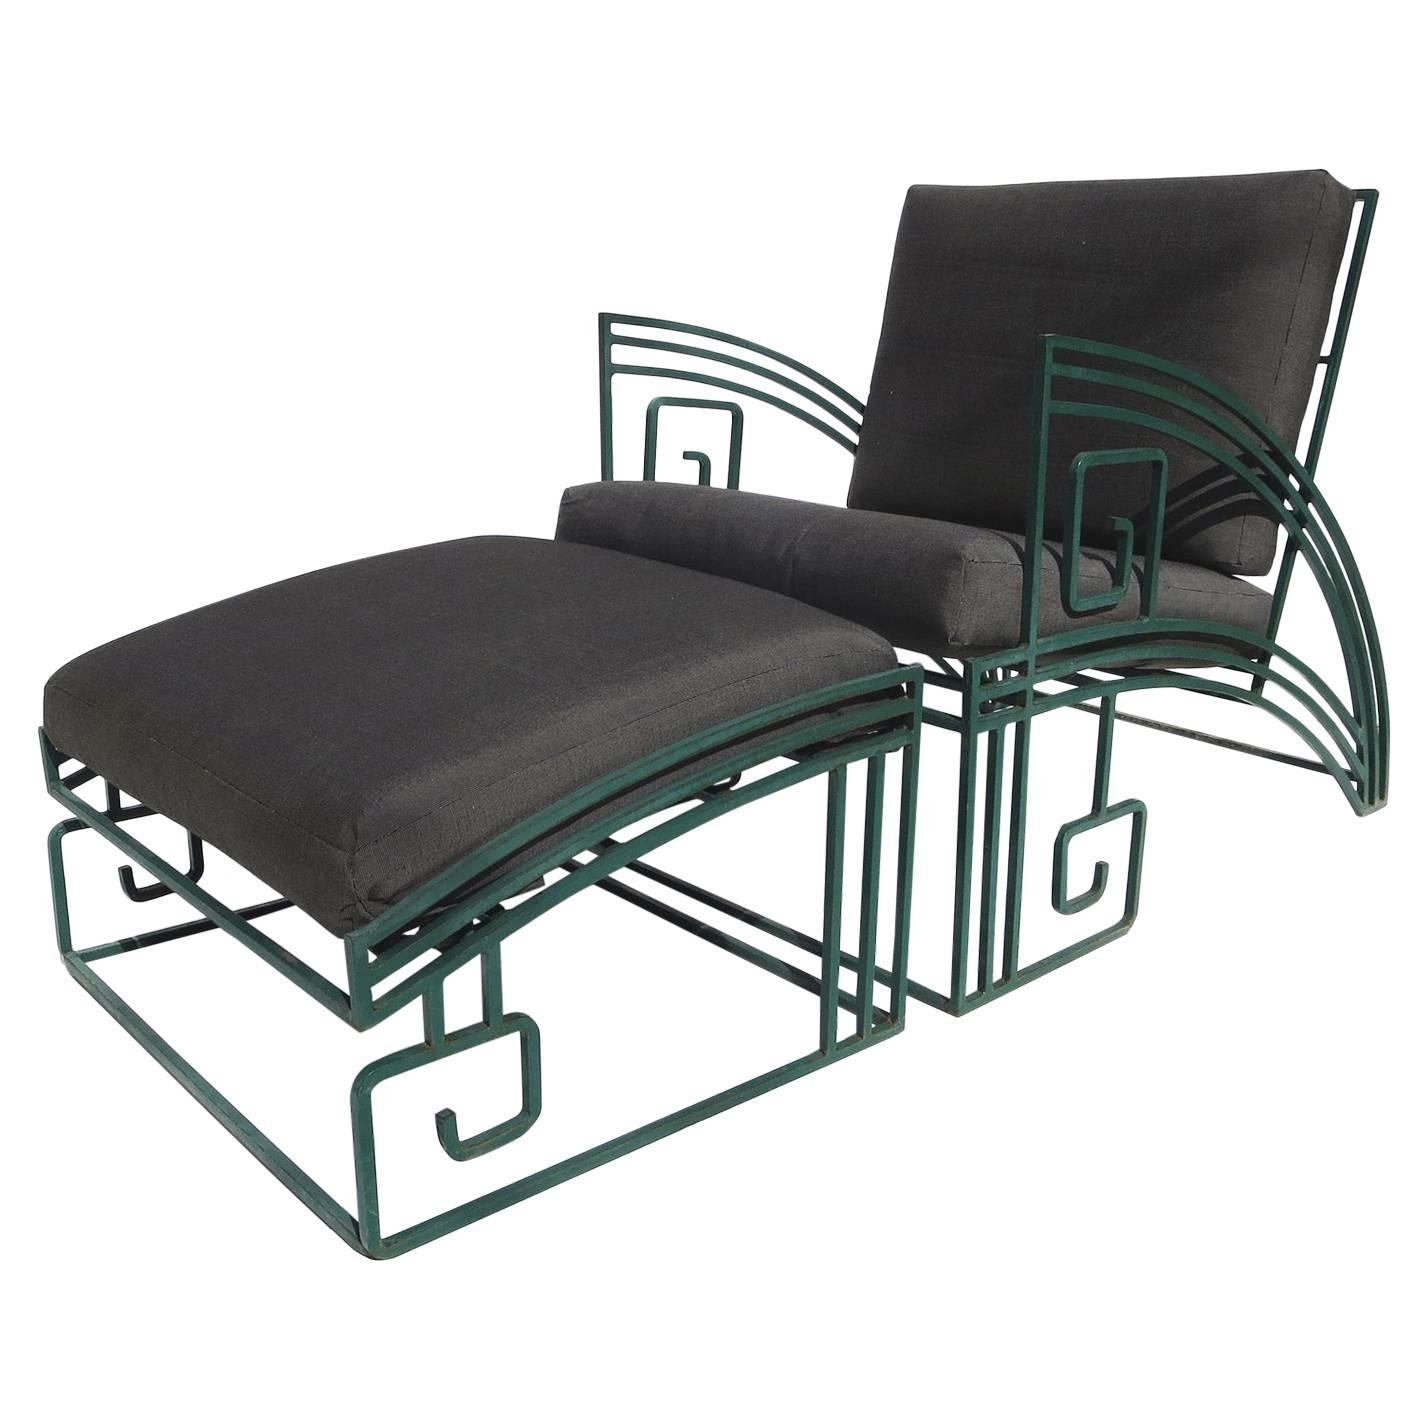 "Biltmore" Iron Chaise by Marina McDonald for Jazz